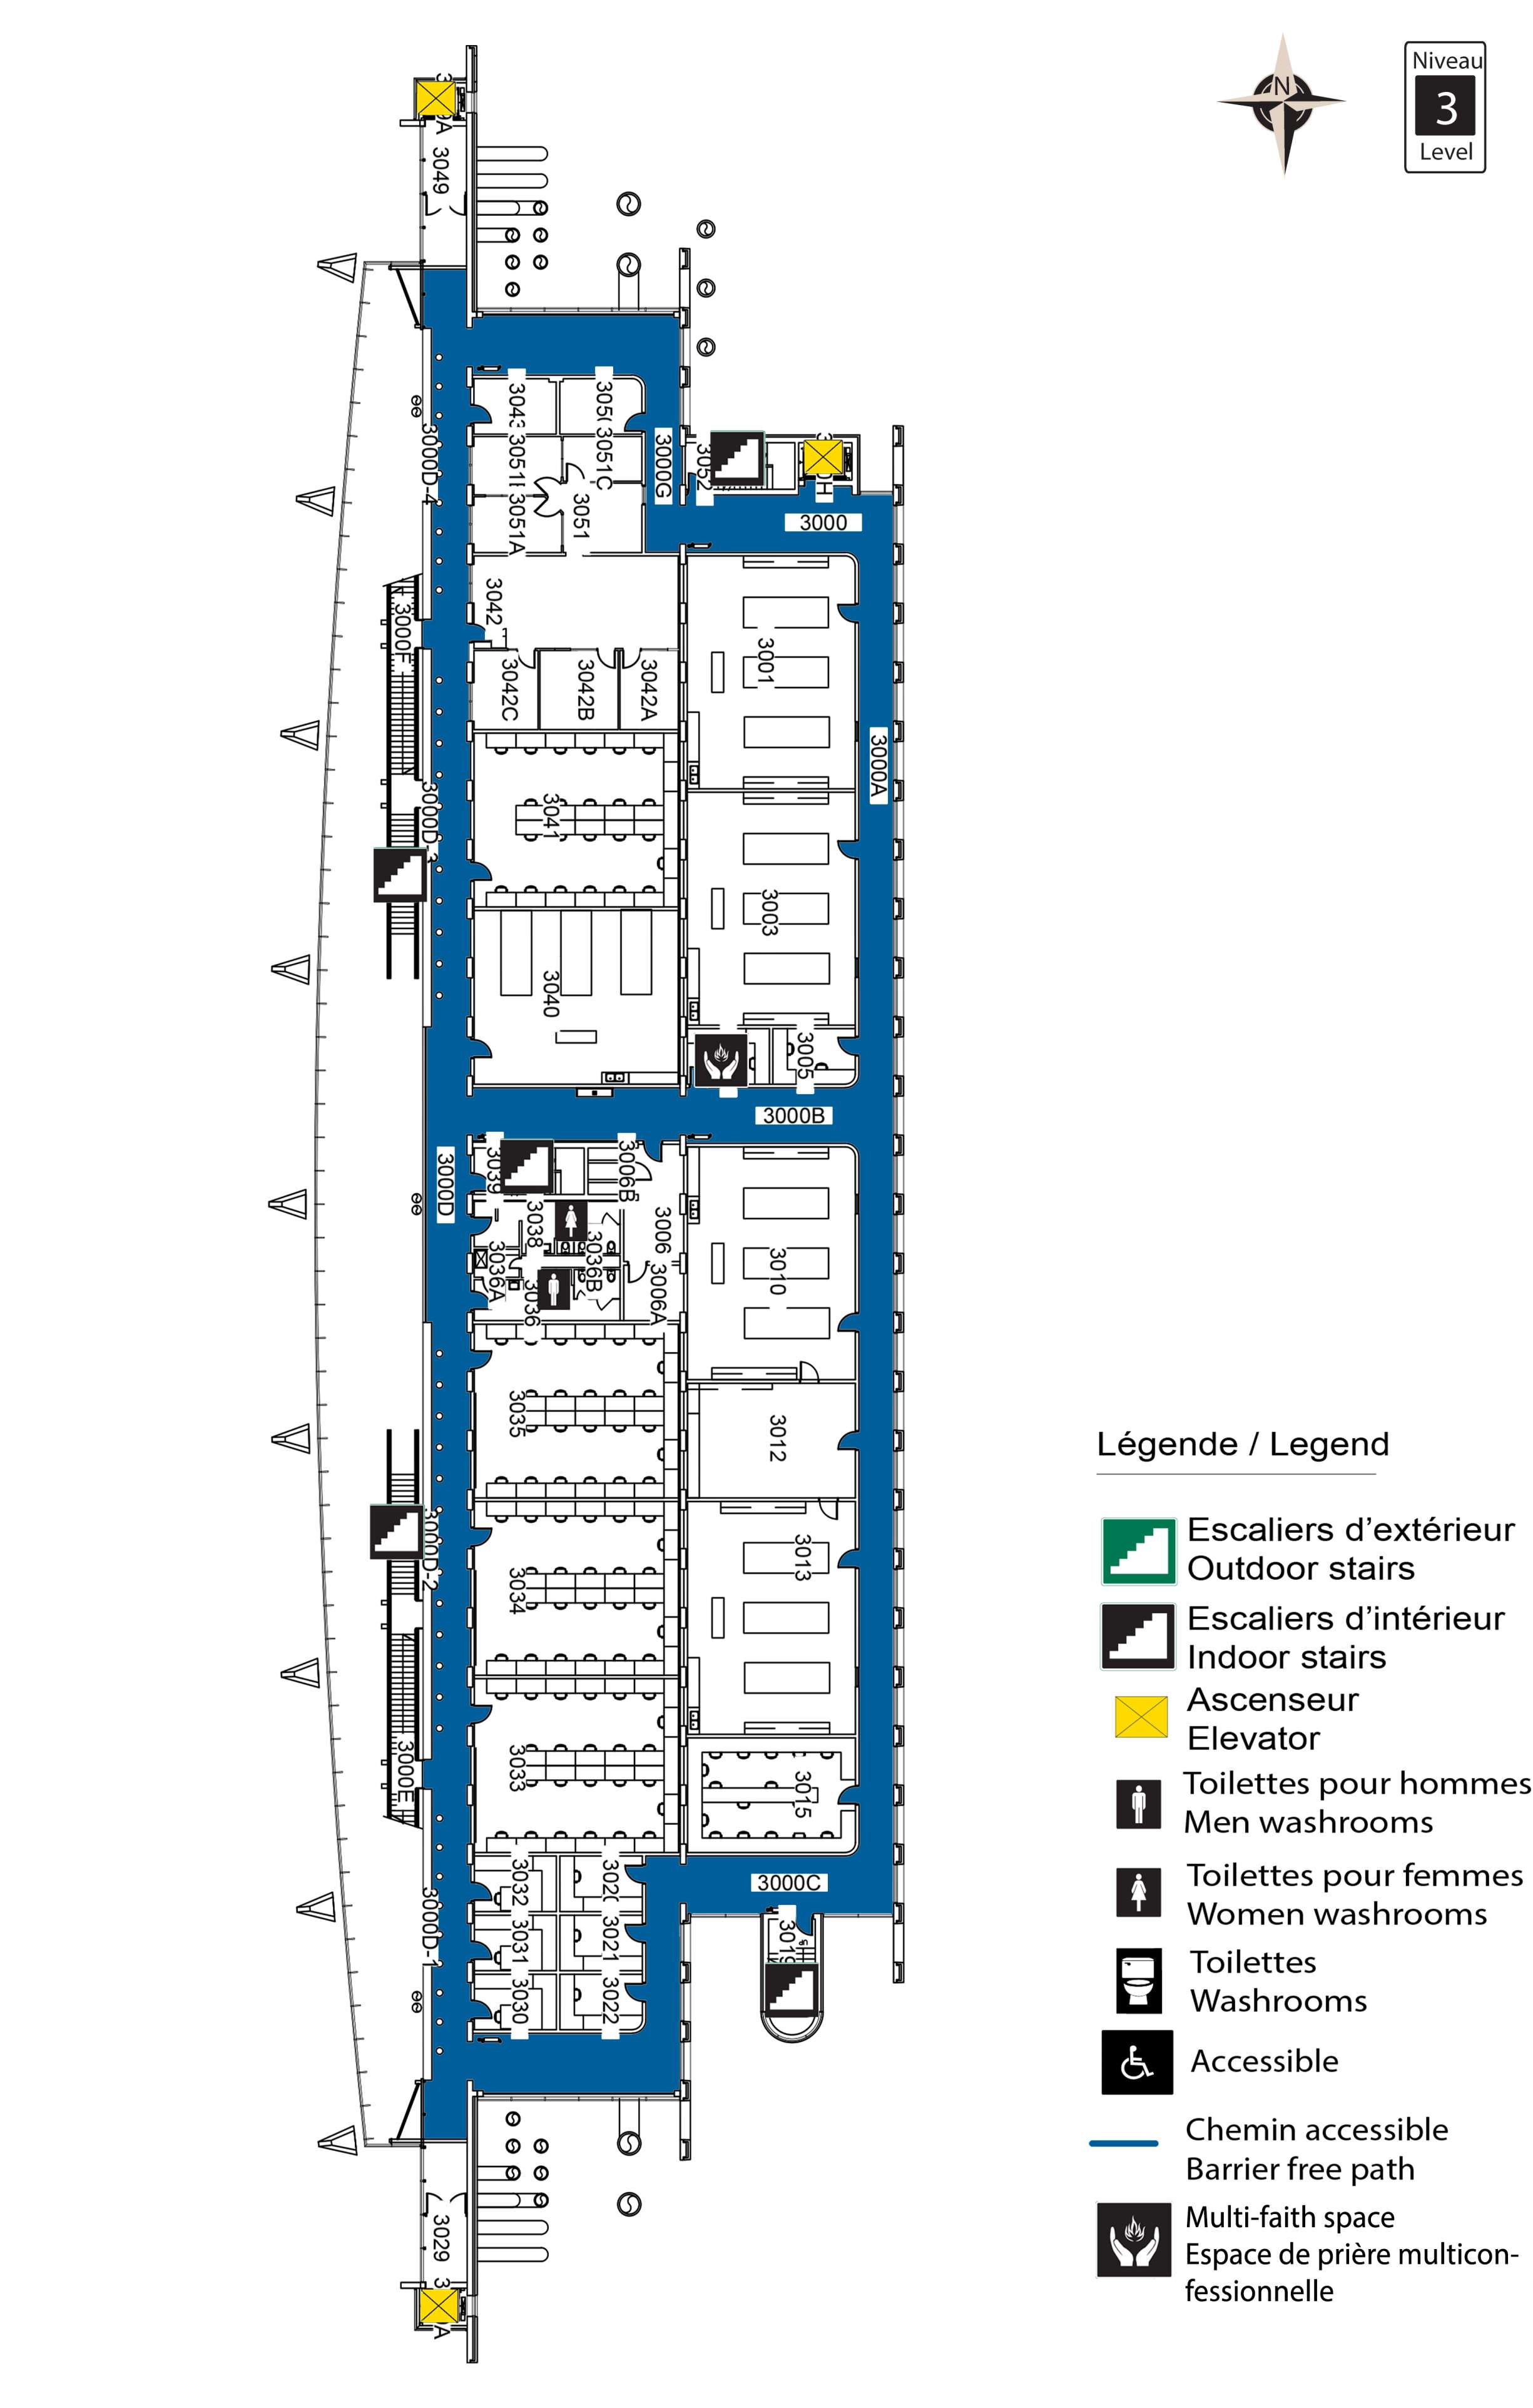 Accessible map of STE level 3